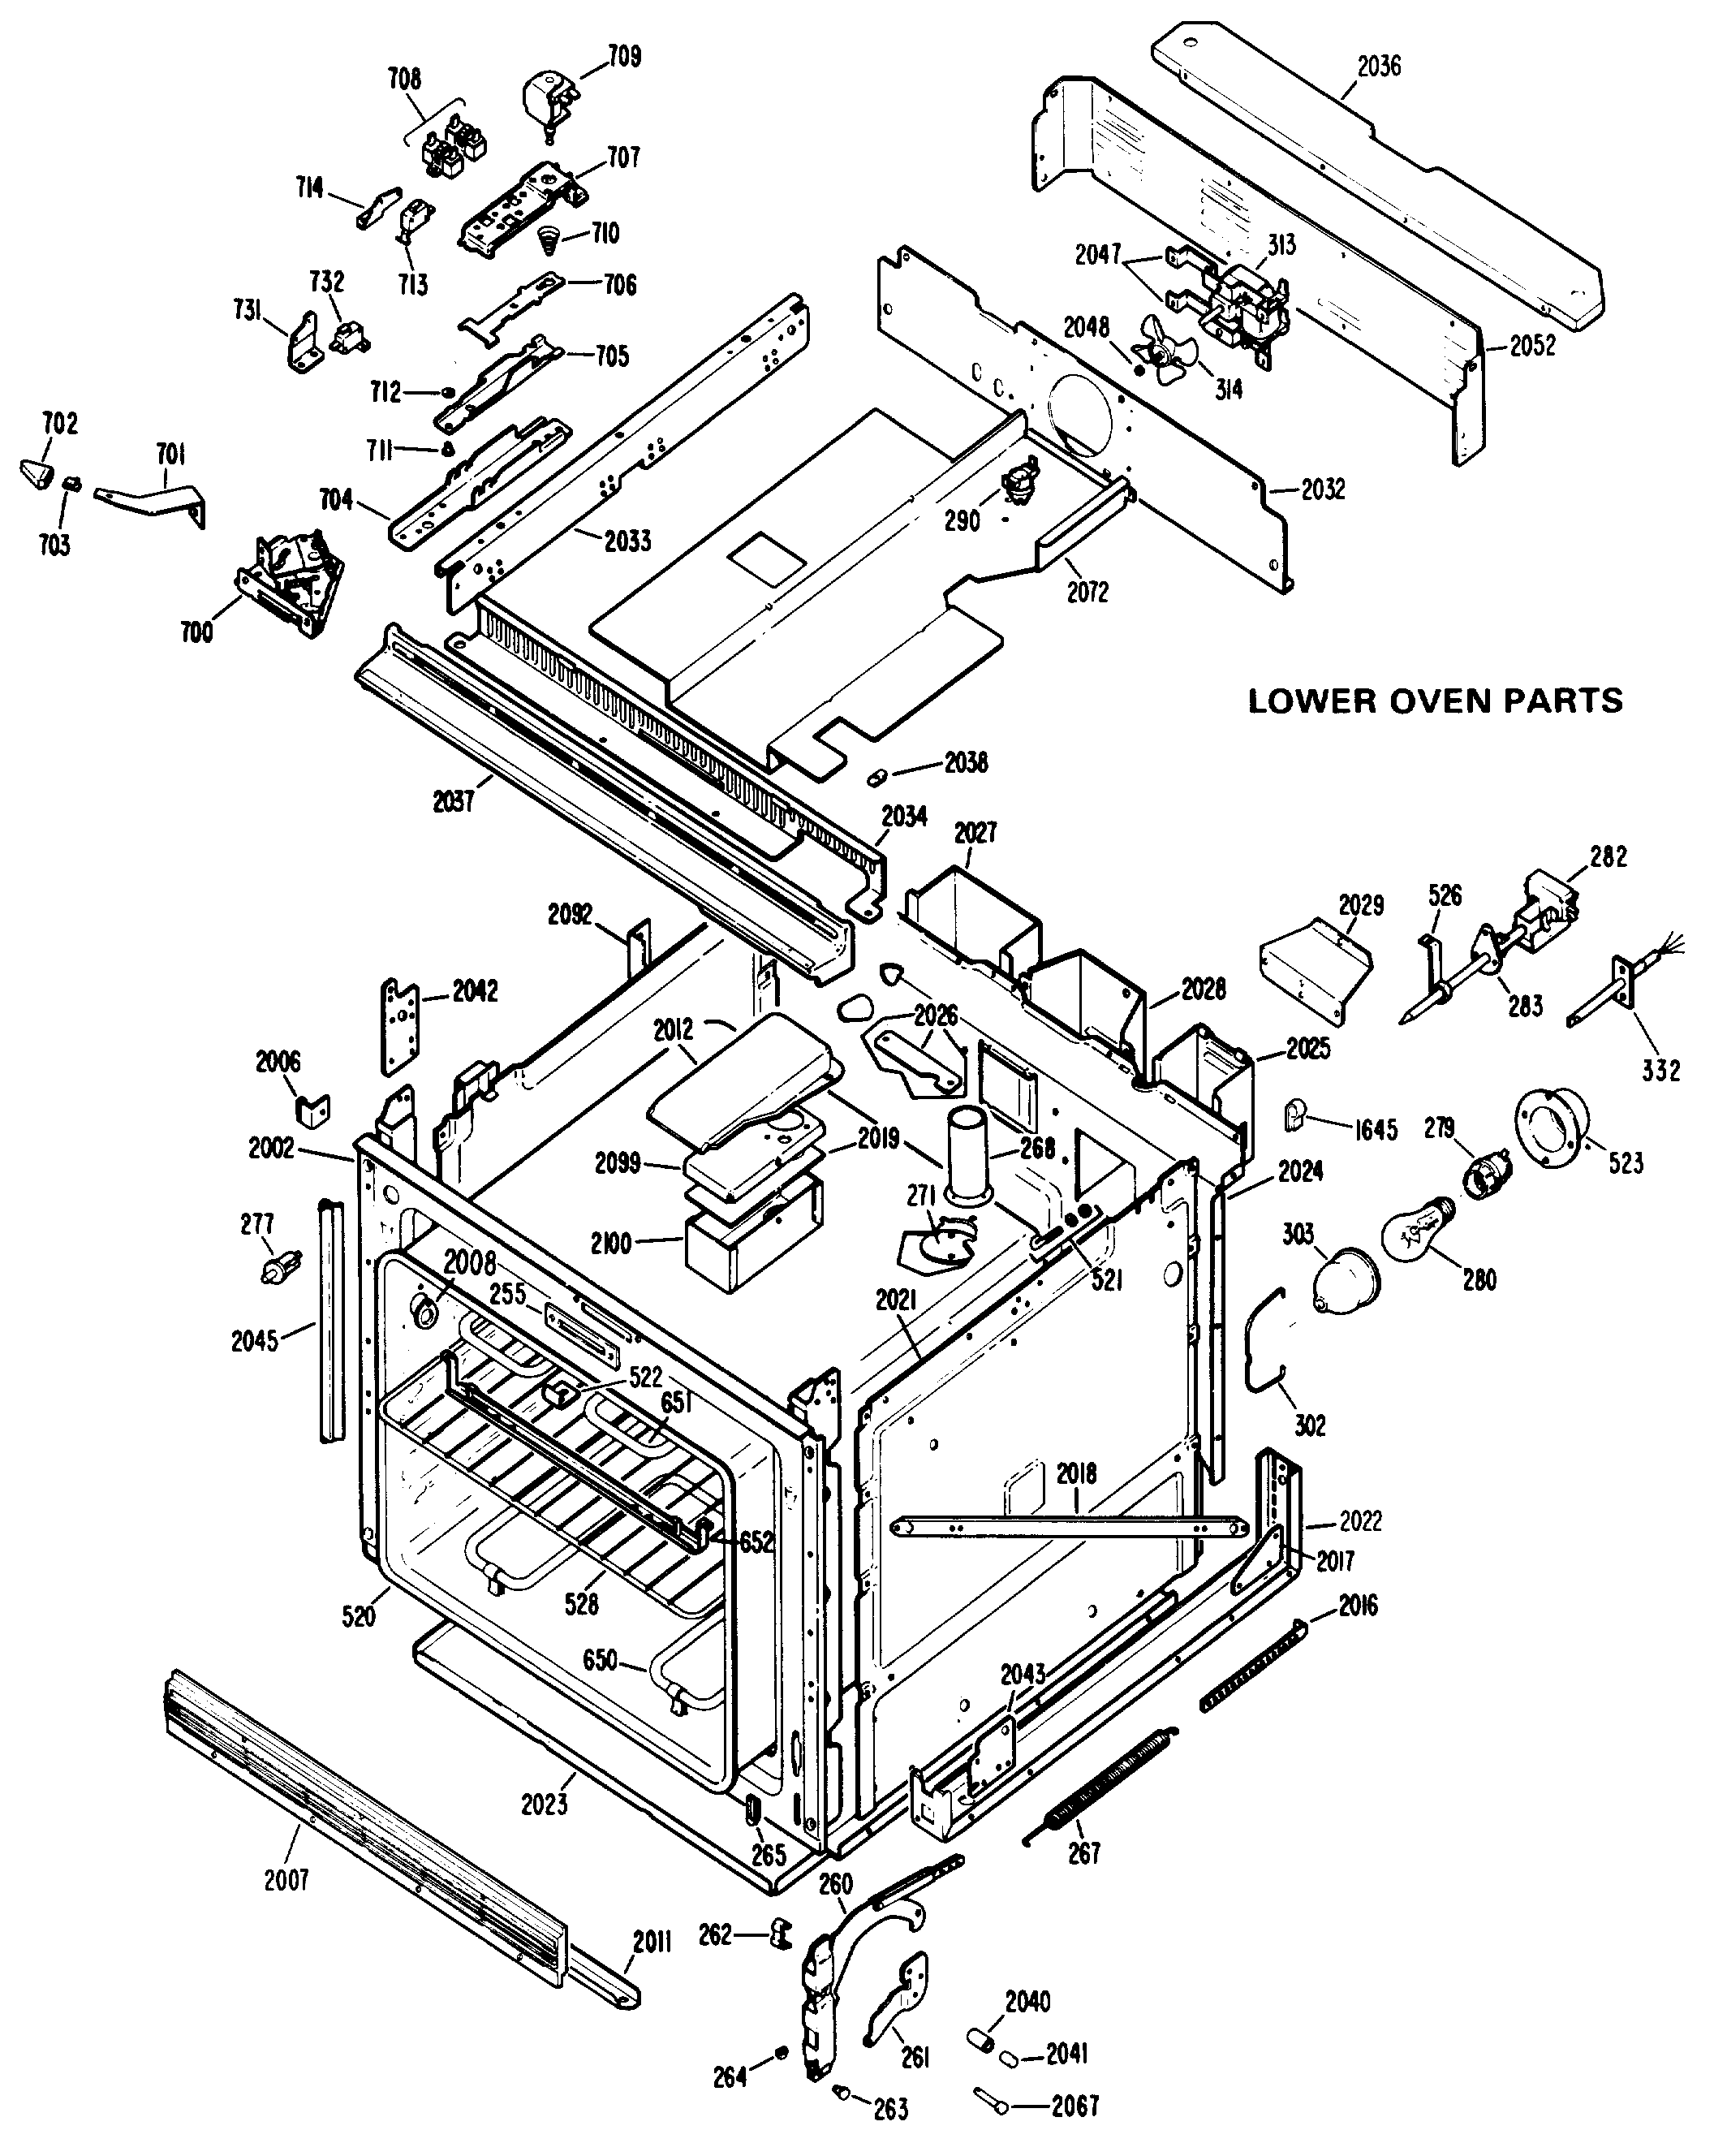 LOWER OVEN PARTS